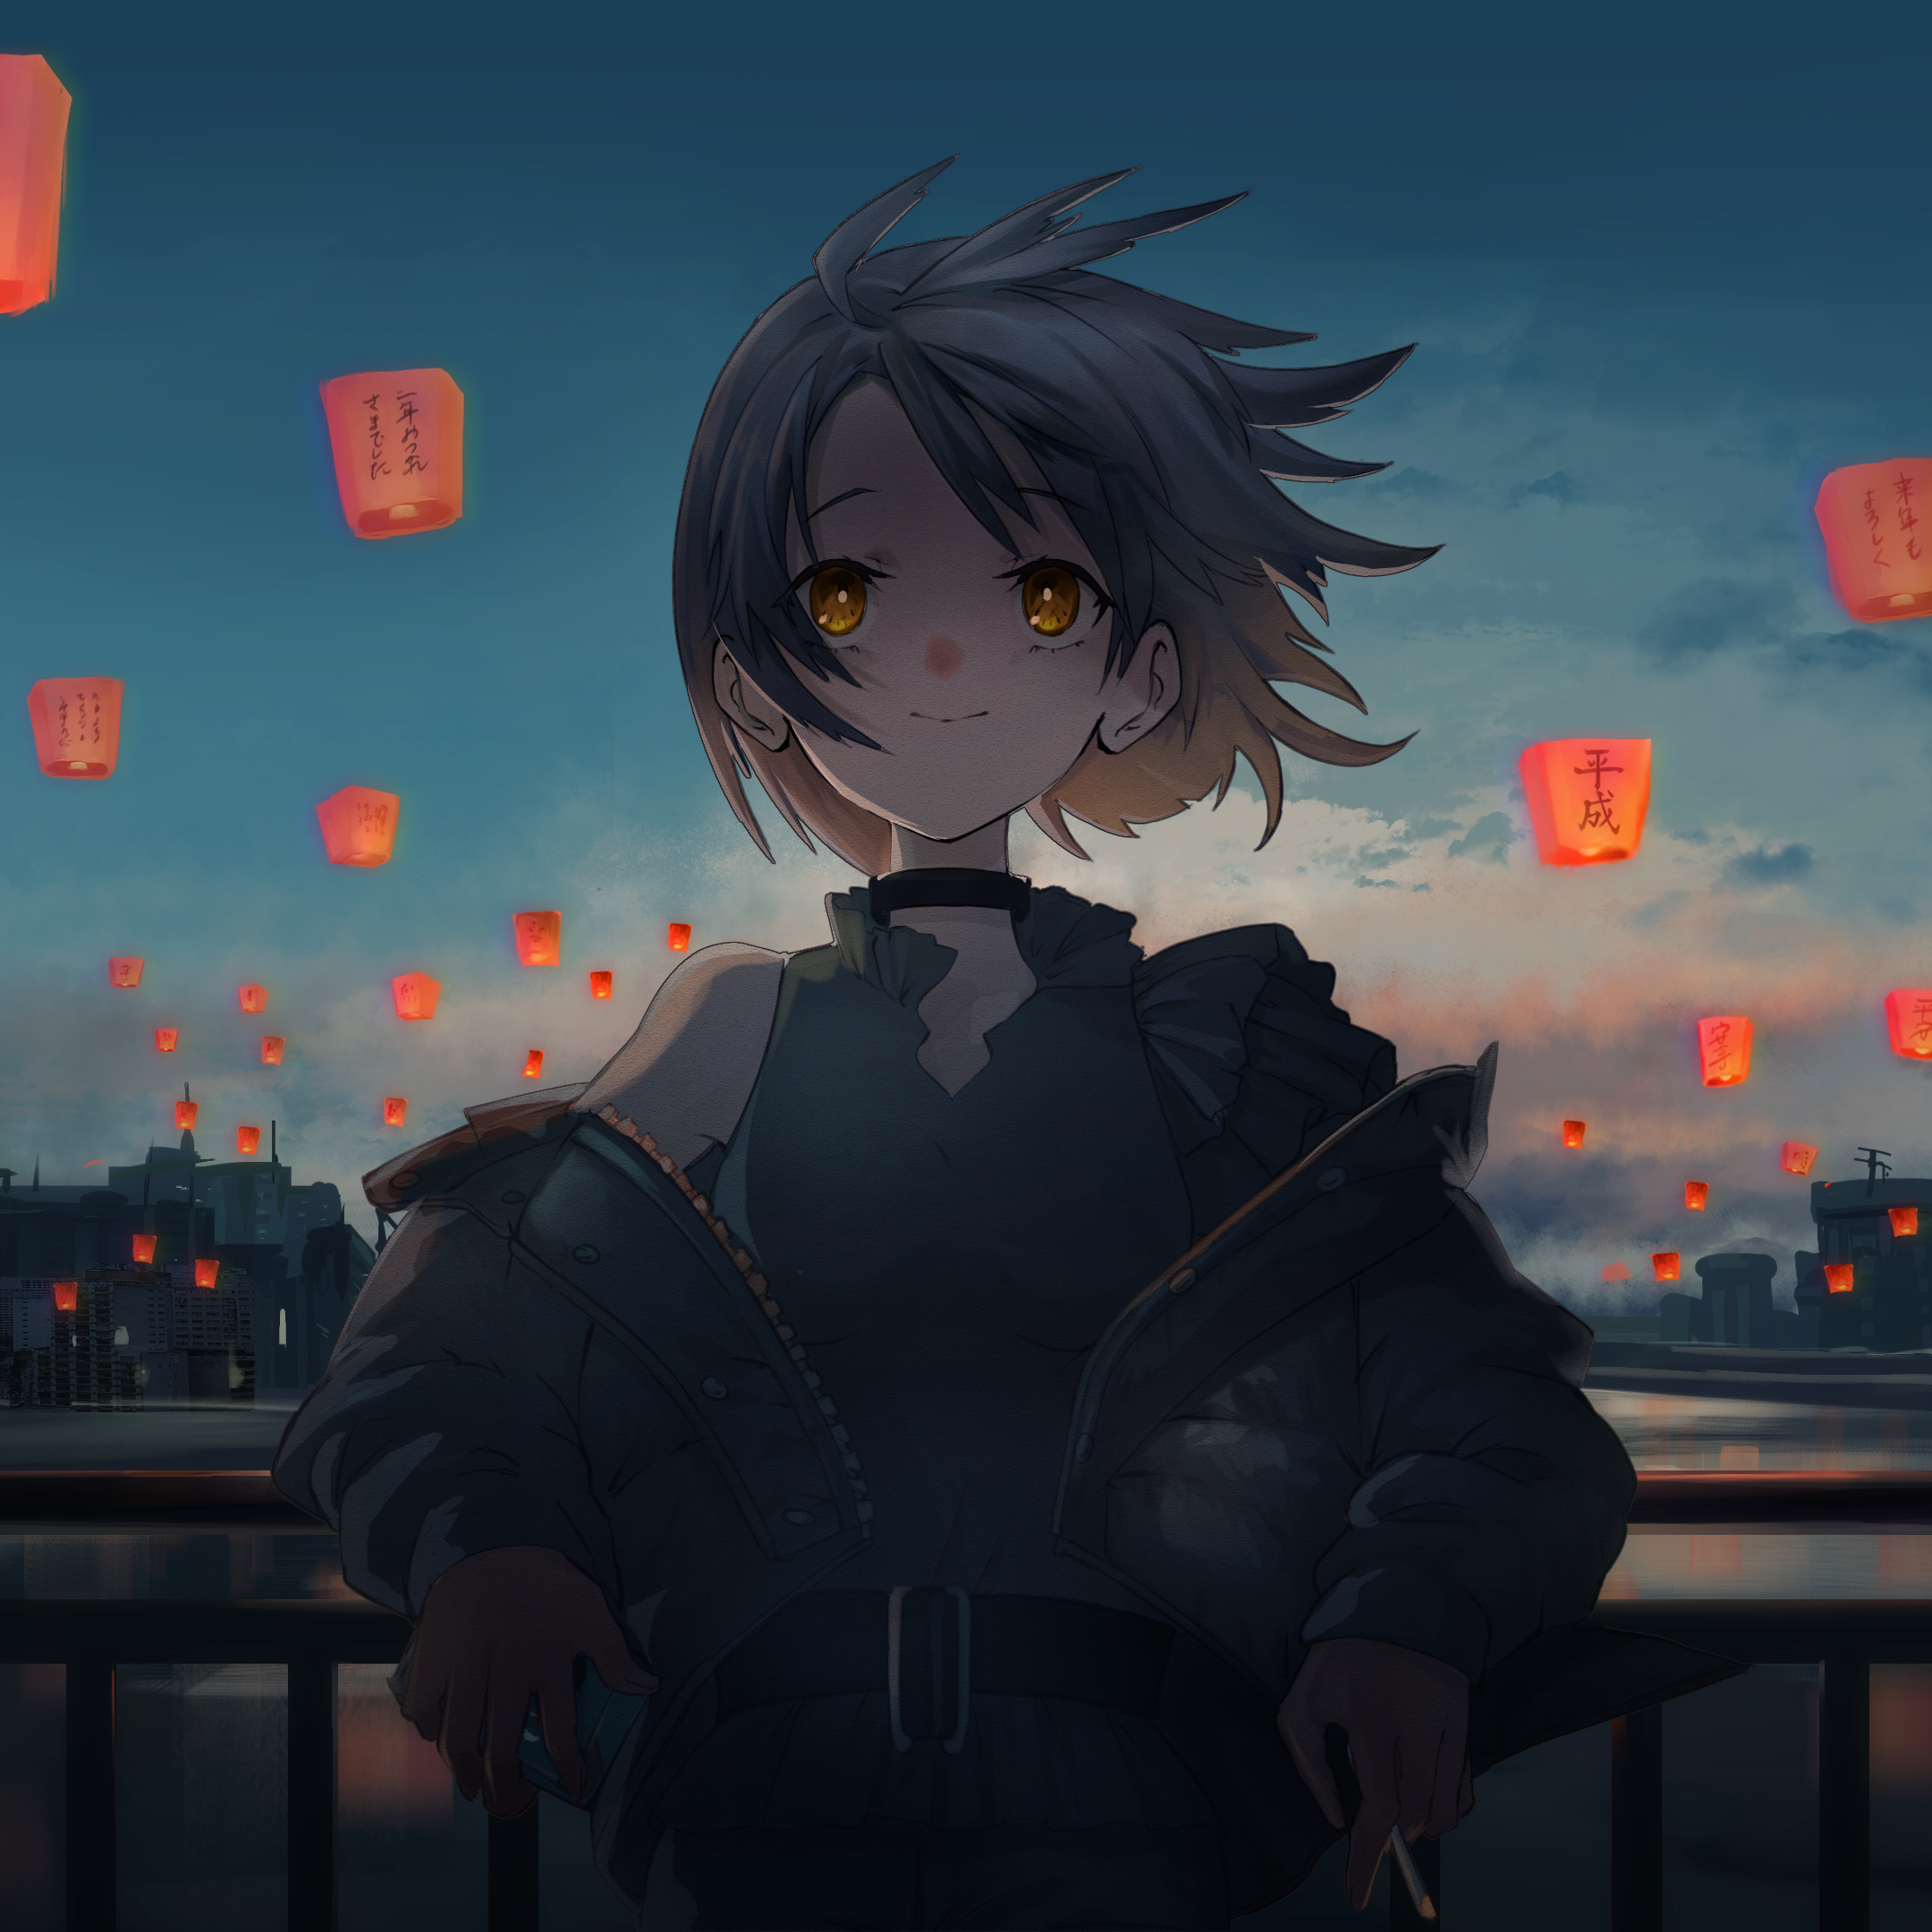 Girl looking at lanterns in the sky by Osd